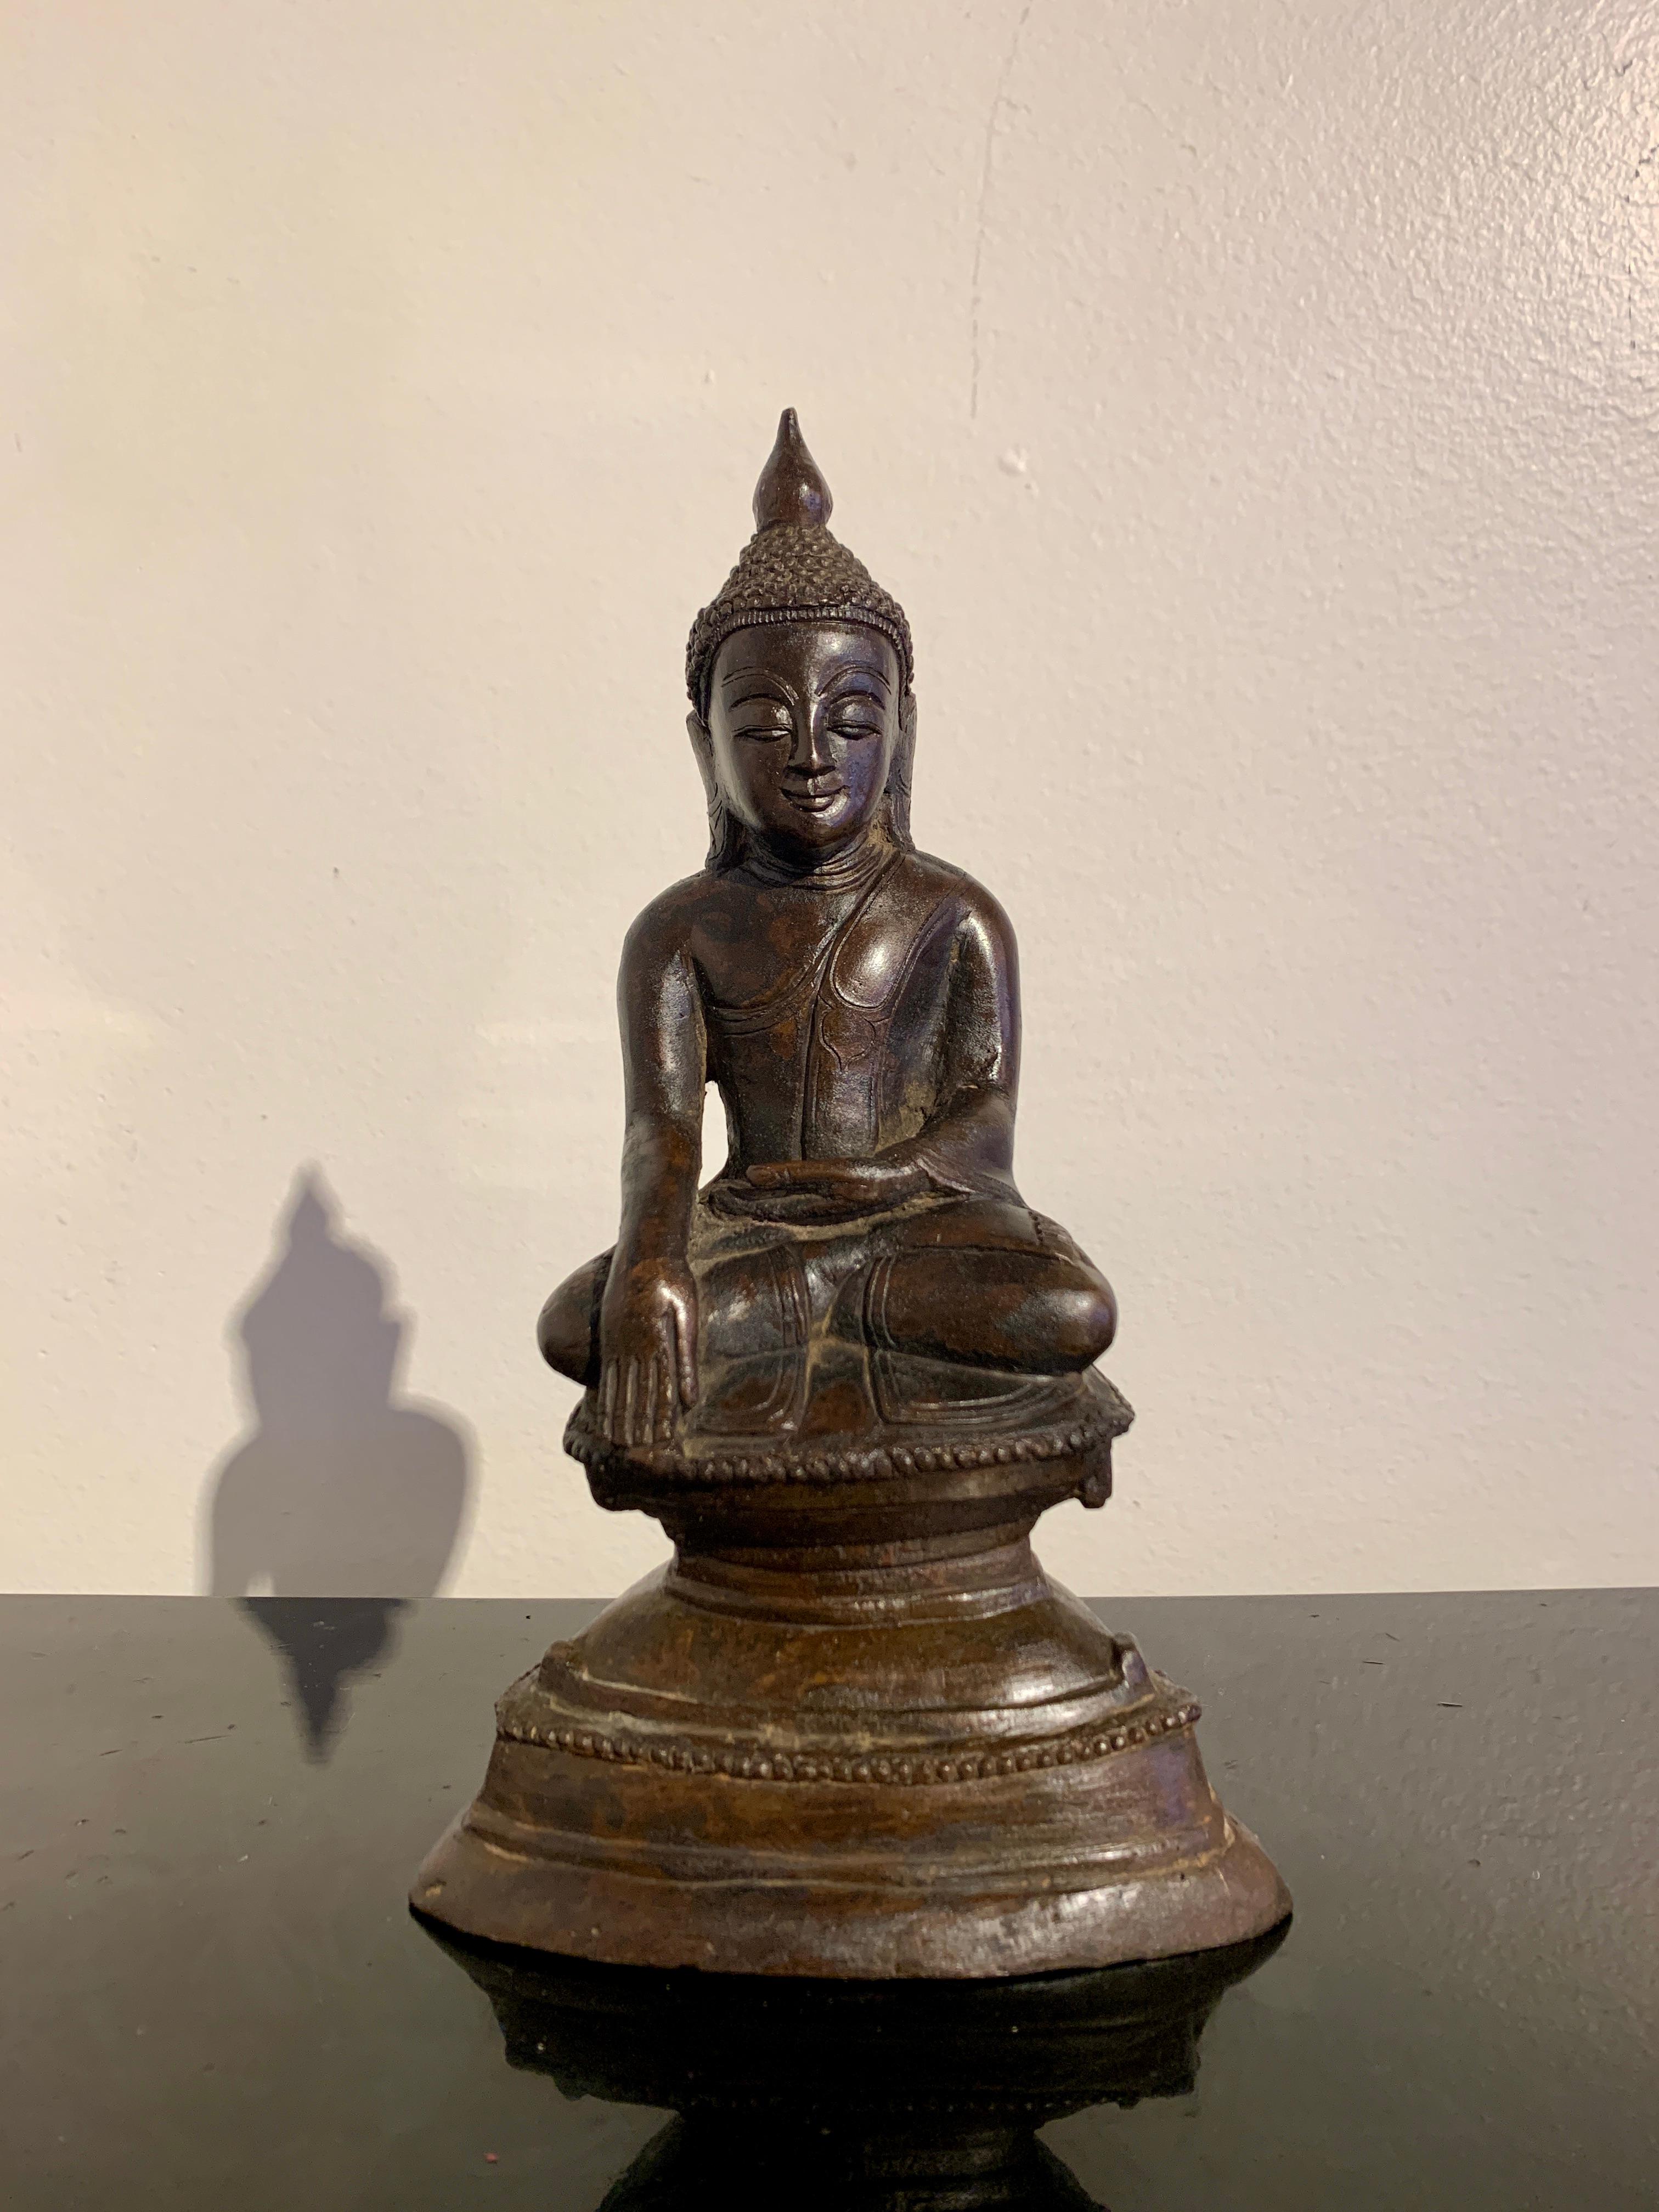 A small and charming Burmese cast bronze Buddha in the Ava style, late 19th or early 20th century, Myanmar (Burma).

The image depicts the historical Buddha, Shakyamuni, seated in full lotus position, his hands in bhumisparsha mudra, the gesture